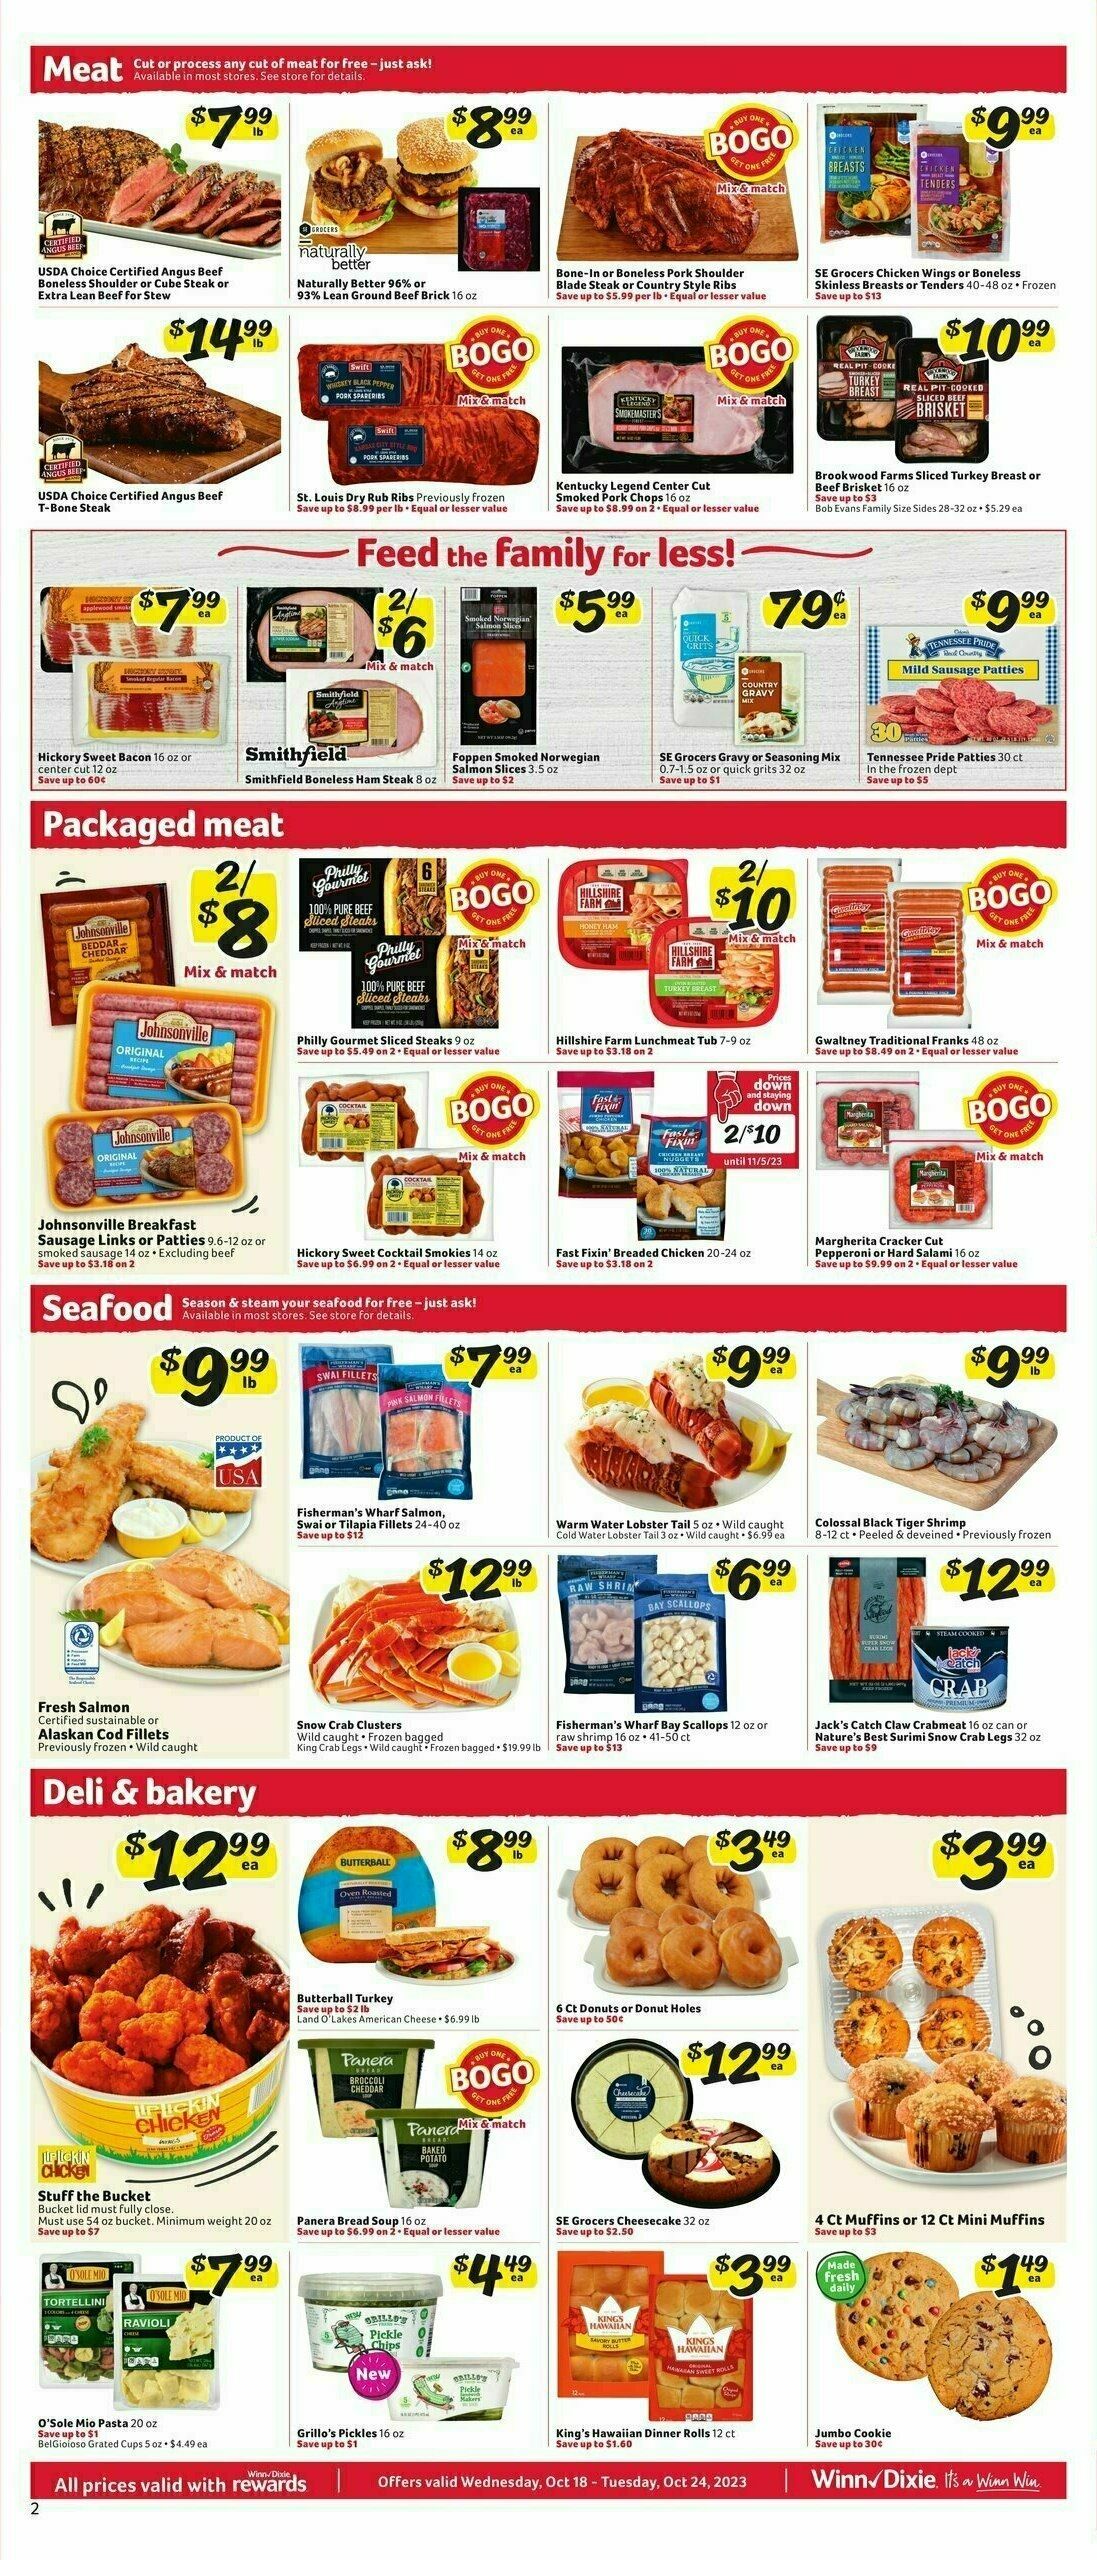 Winn-Dixie Weekly Ad from October 18